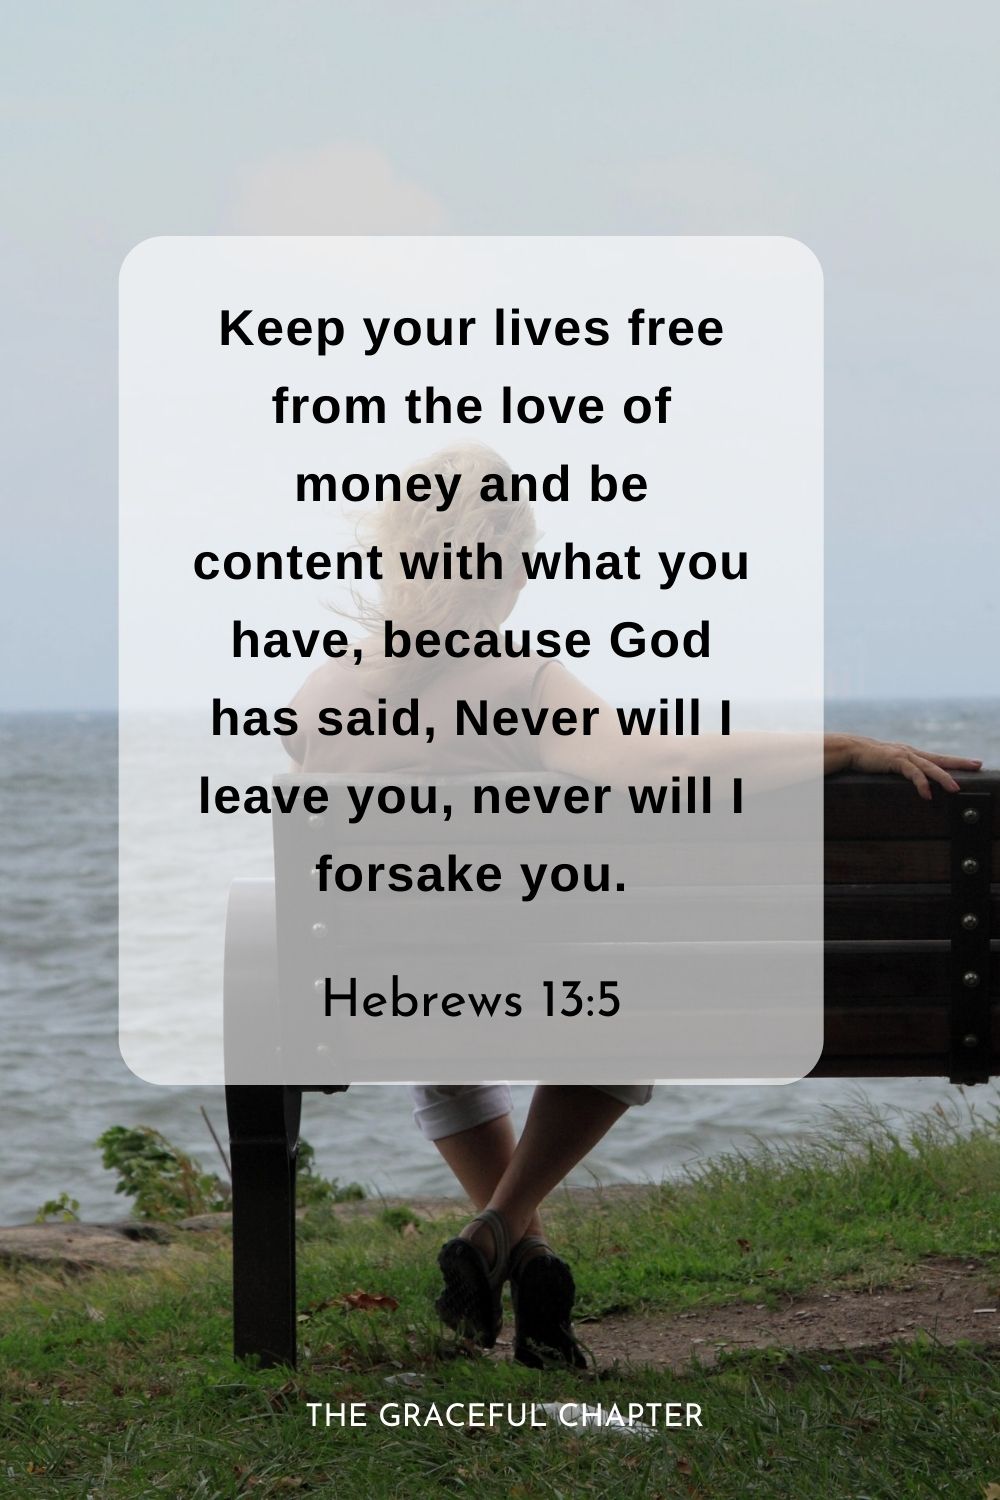 Keep your lives free from the love of money and be content with what you have, because God has said, Never will I leave you, never will I forsake you.